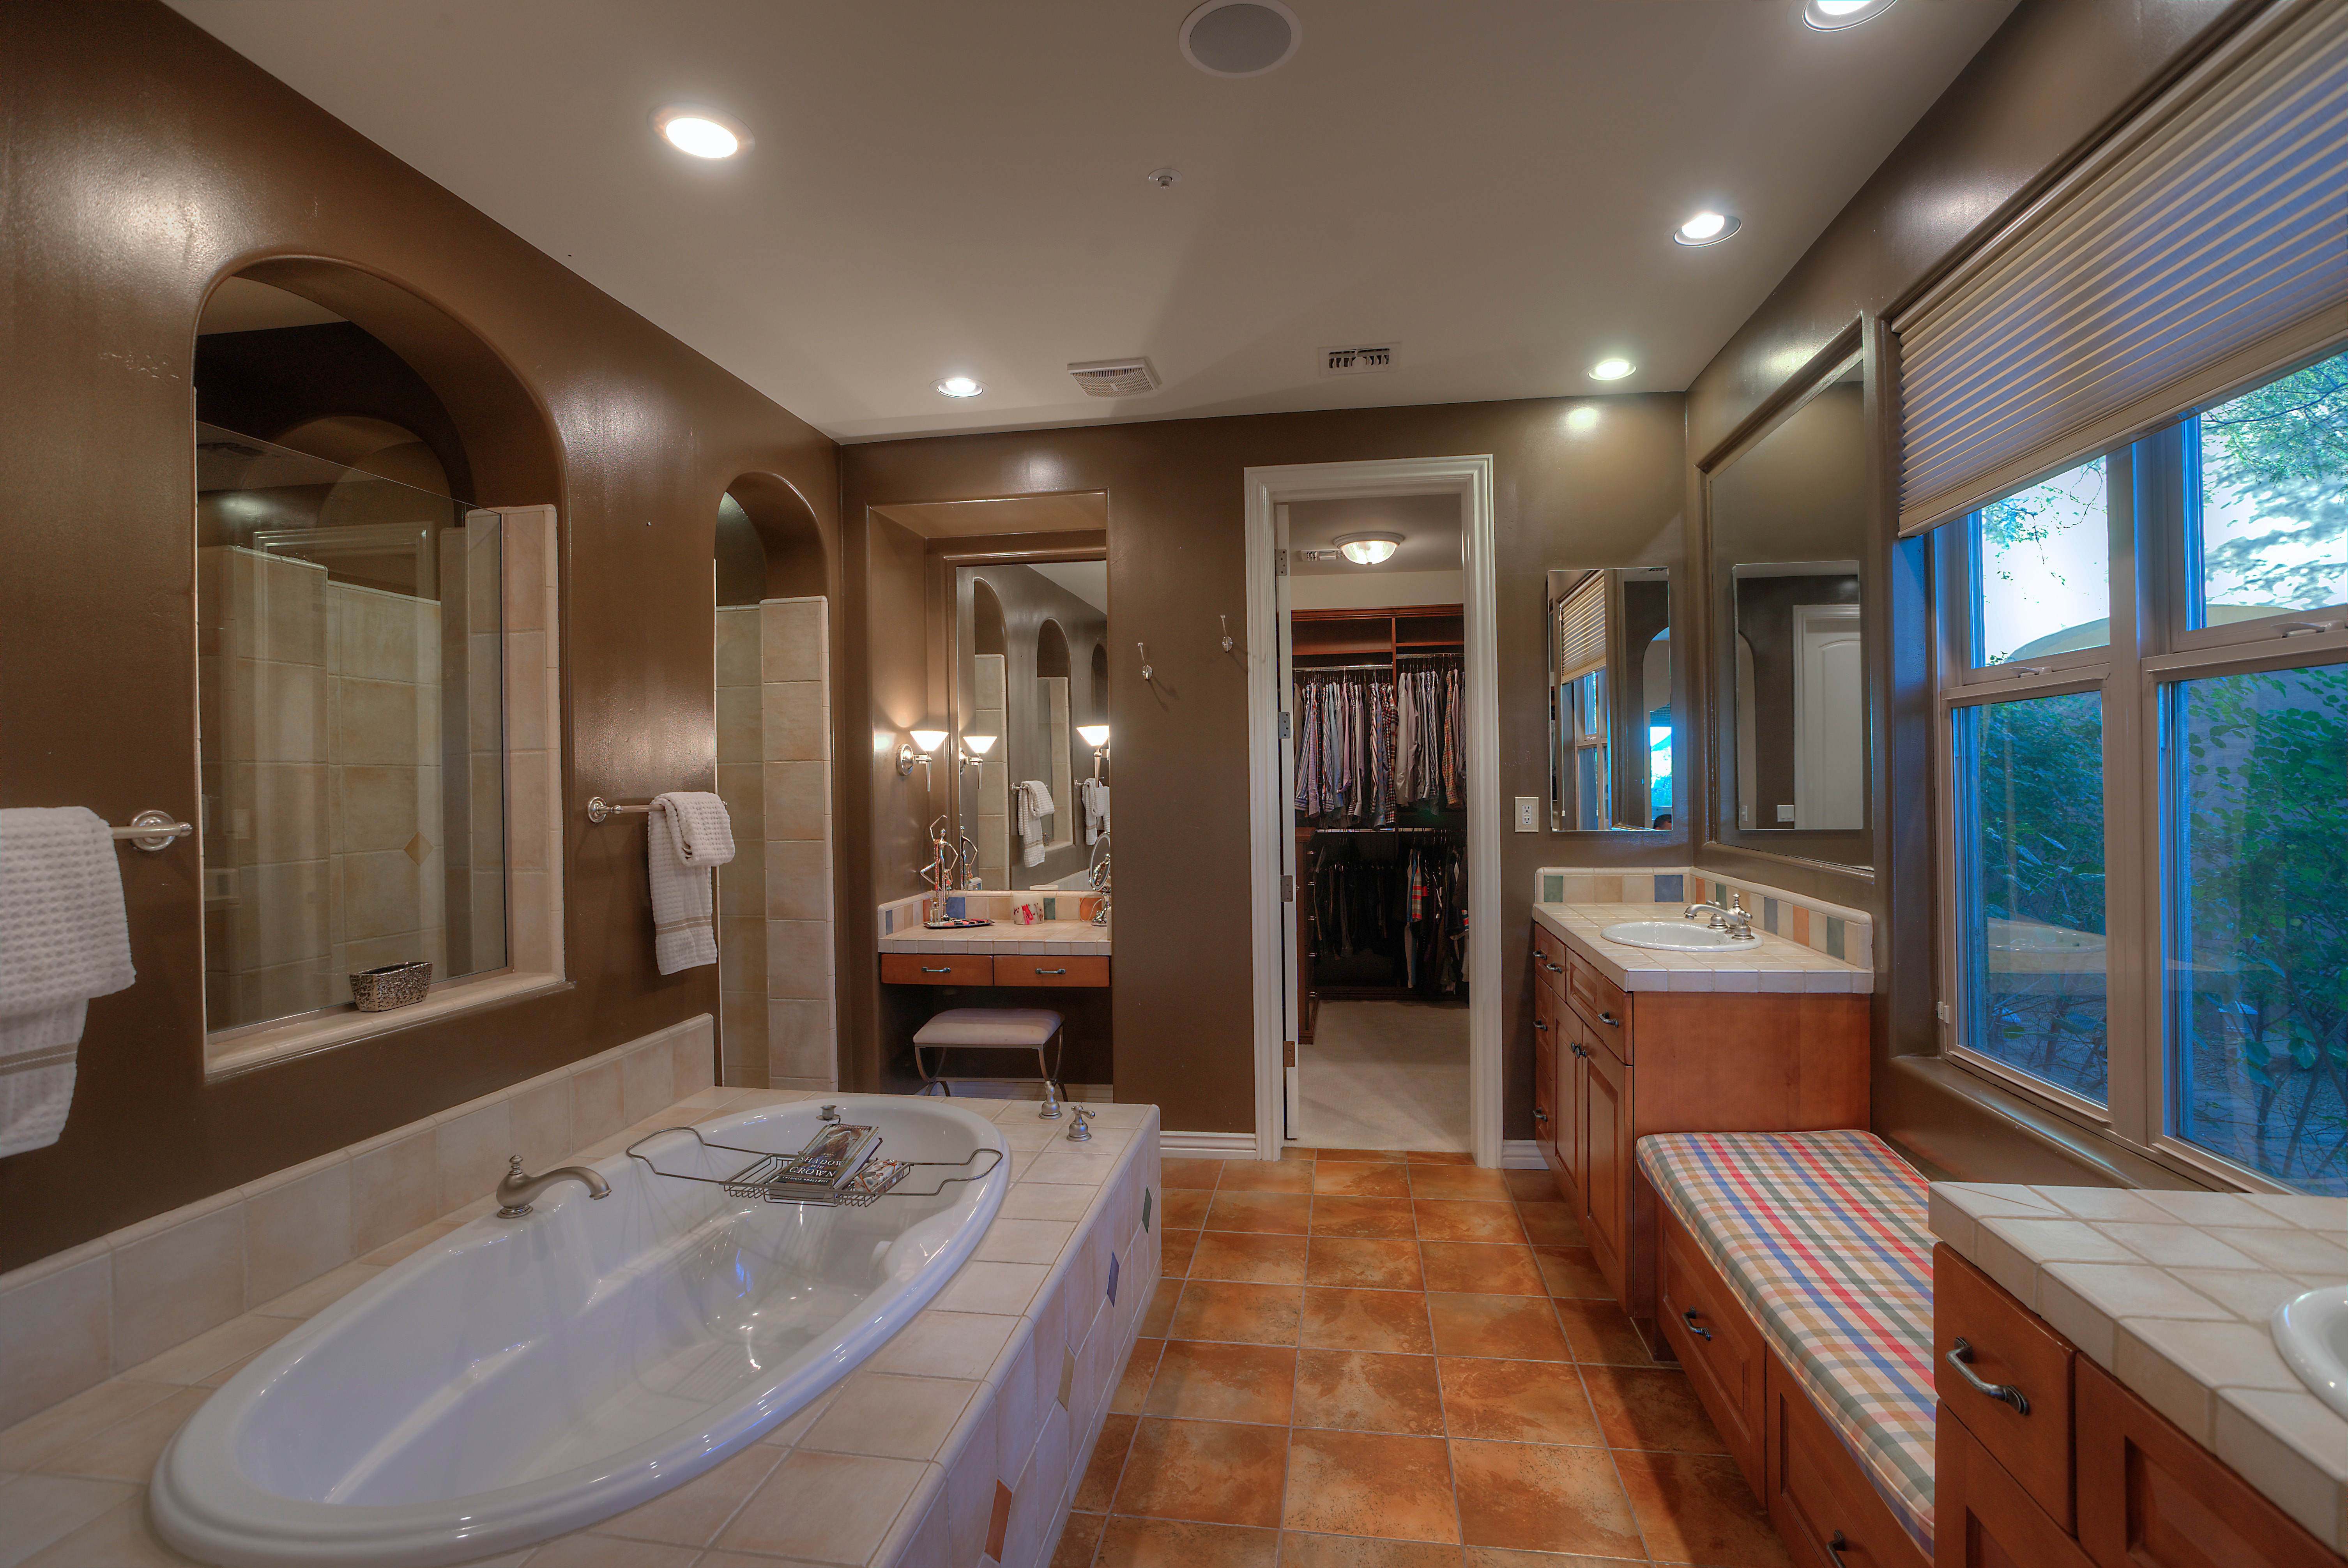 Spa-like en-suite bath at this Scottsdale home for sale in DC Ranch located at 19829 N 97th Pl Scottsdale, AZ 85255 listed by Don Matheson at The Matheson Team